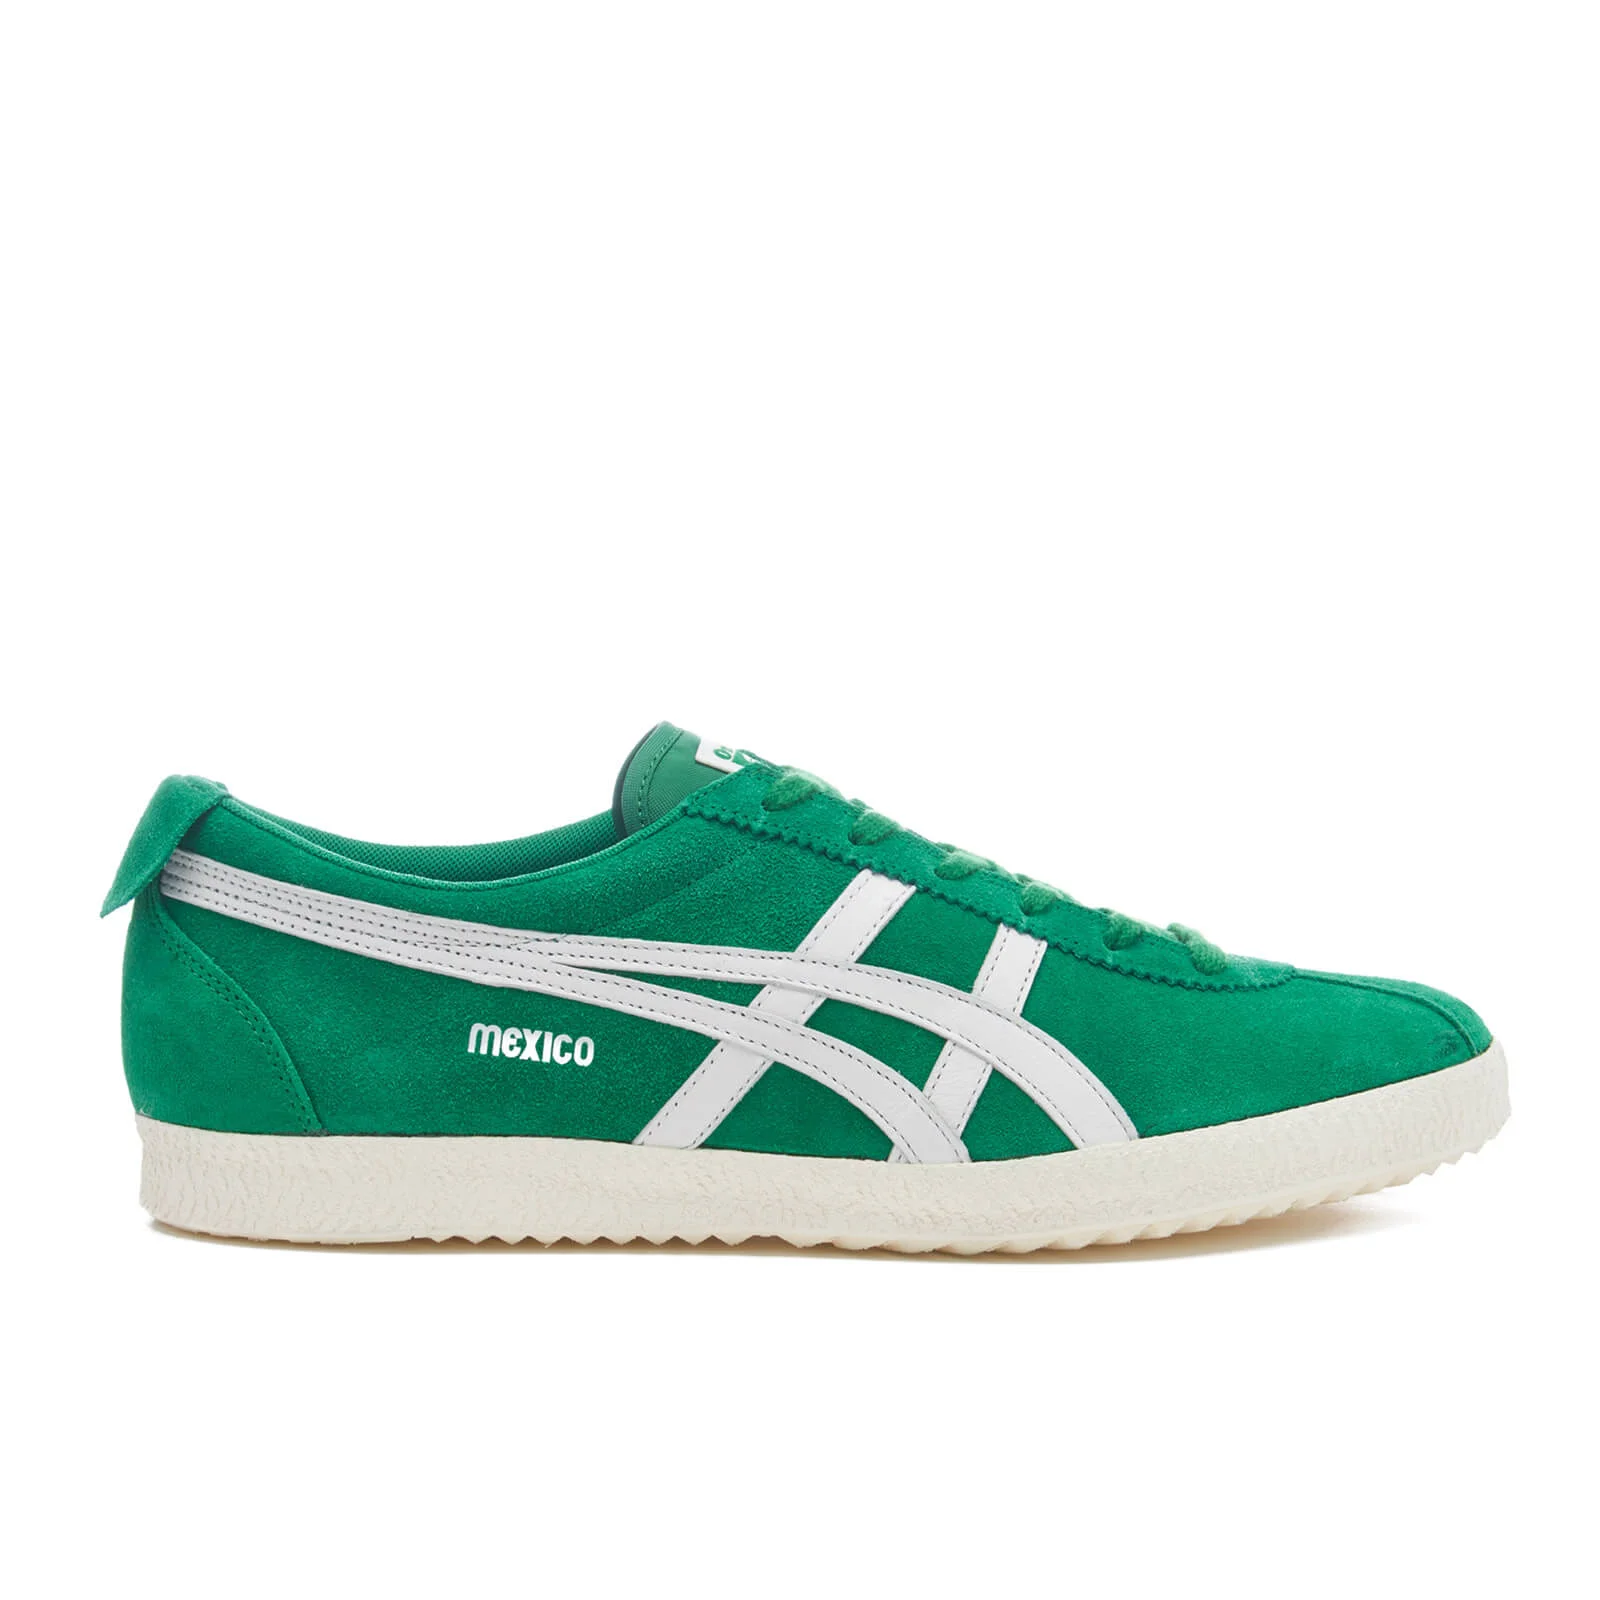 Asics Lifestyle Men's Mexico Delegation Trainers - Green/White Image 1